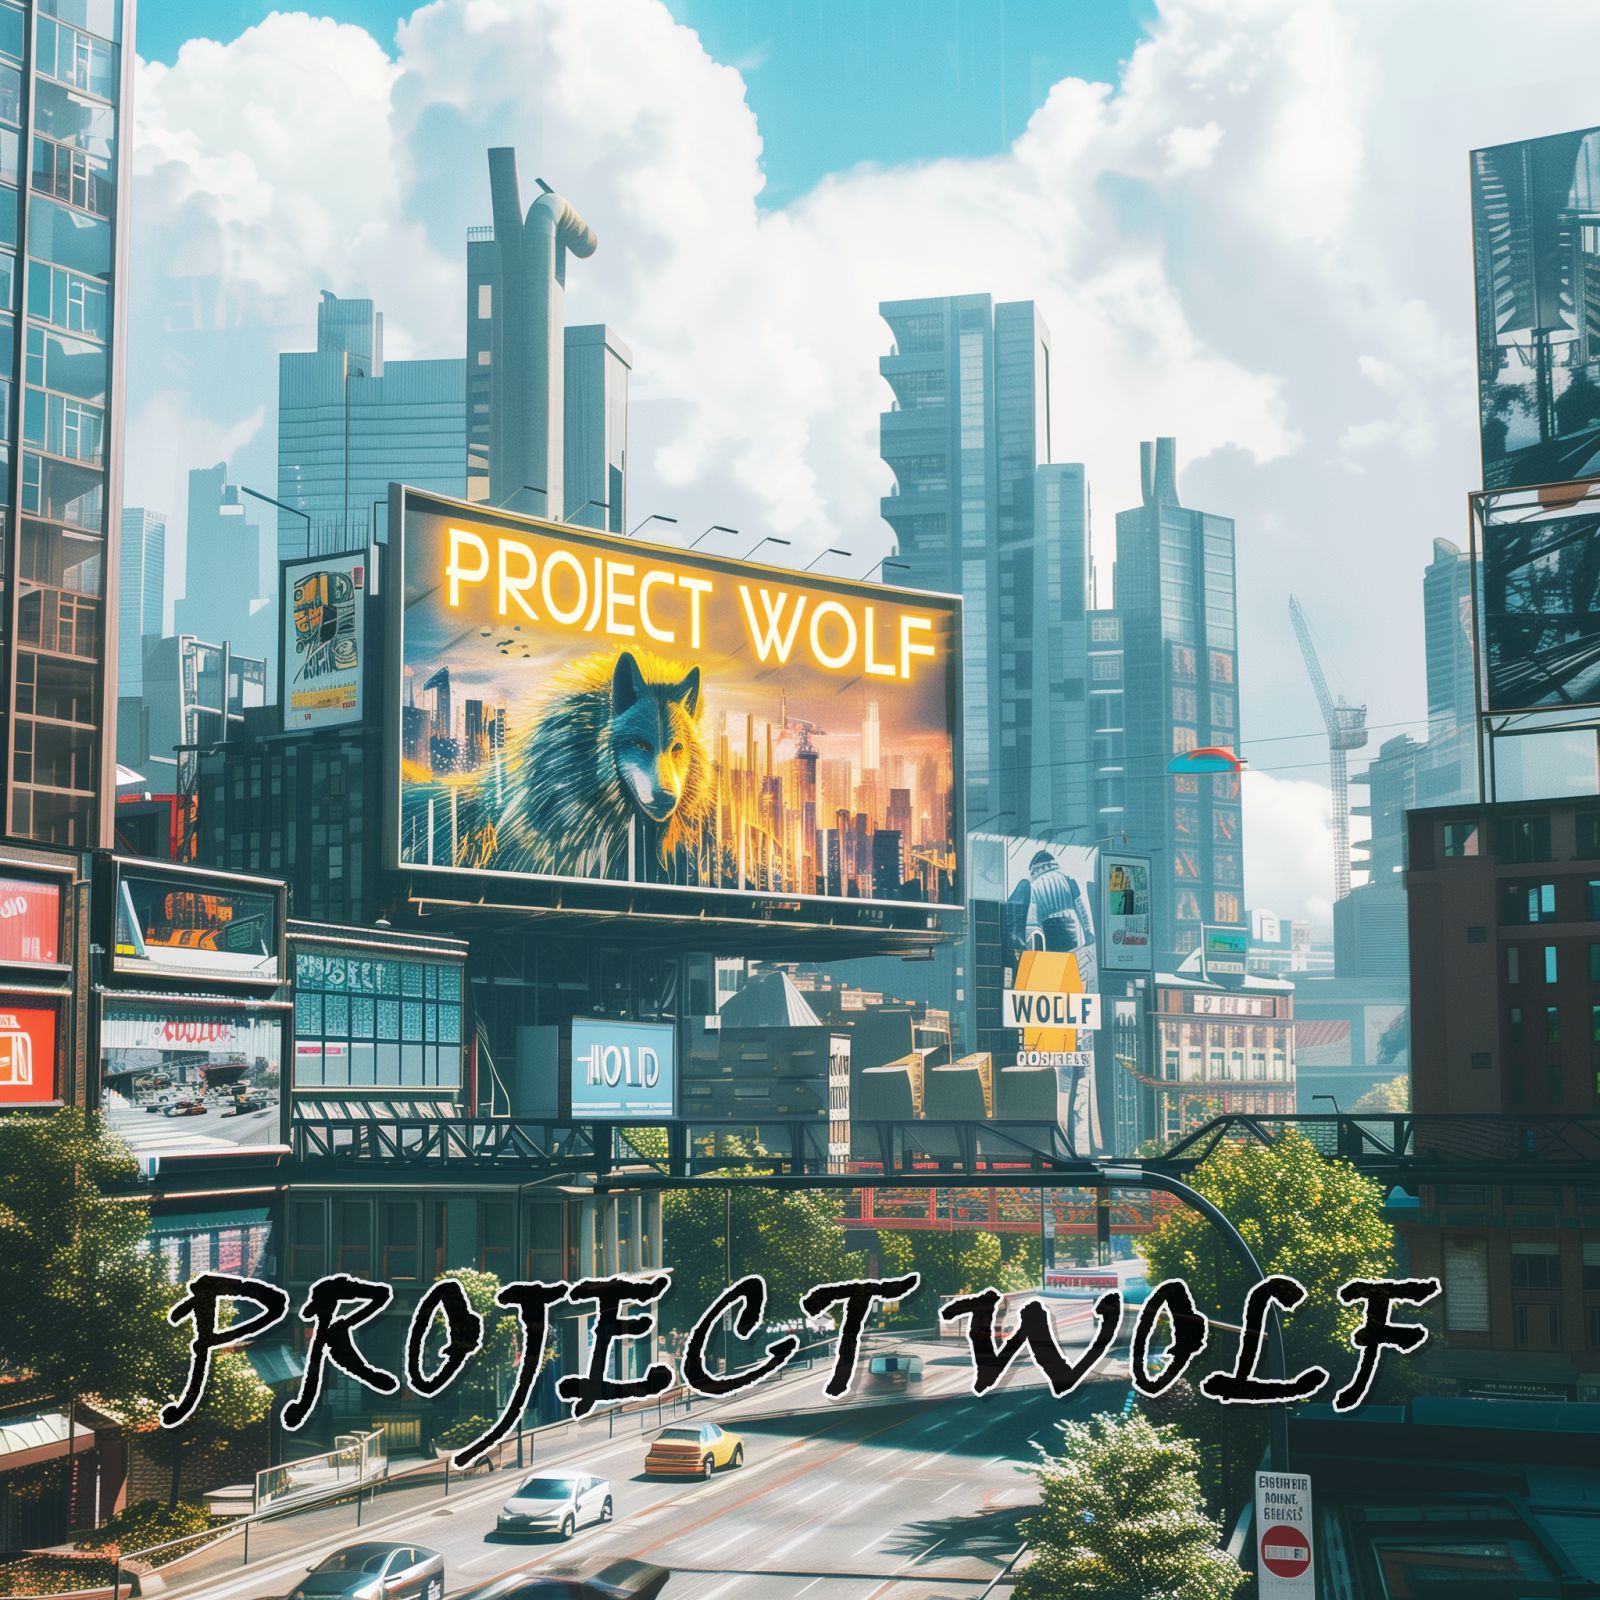 storm2day_A_modern_city_with_a_billboard_that_says_PROJECT_WOLF_a813b35f-f5a7-4248-bc0a-3f220d2eb317.png.jpg